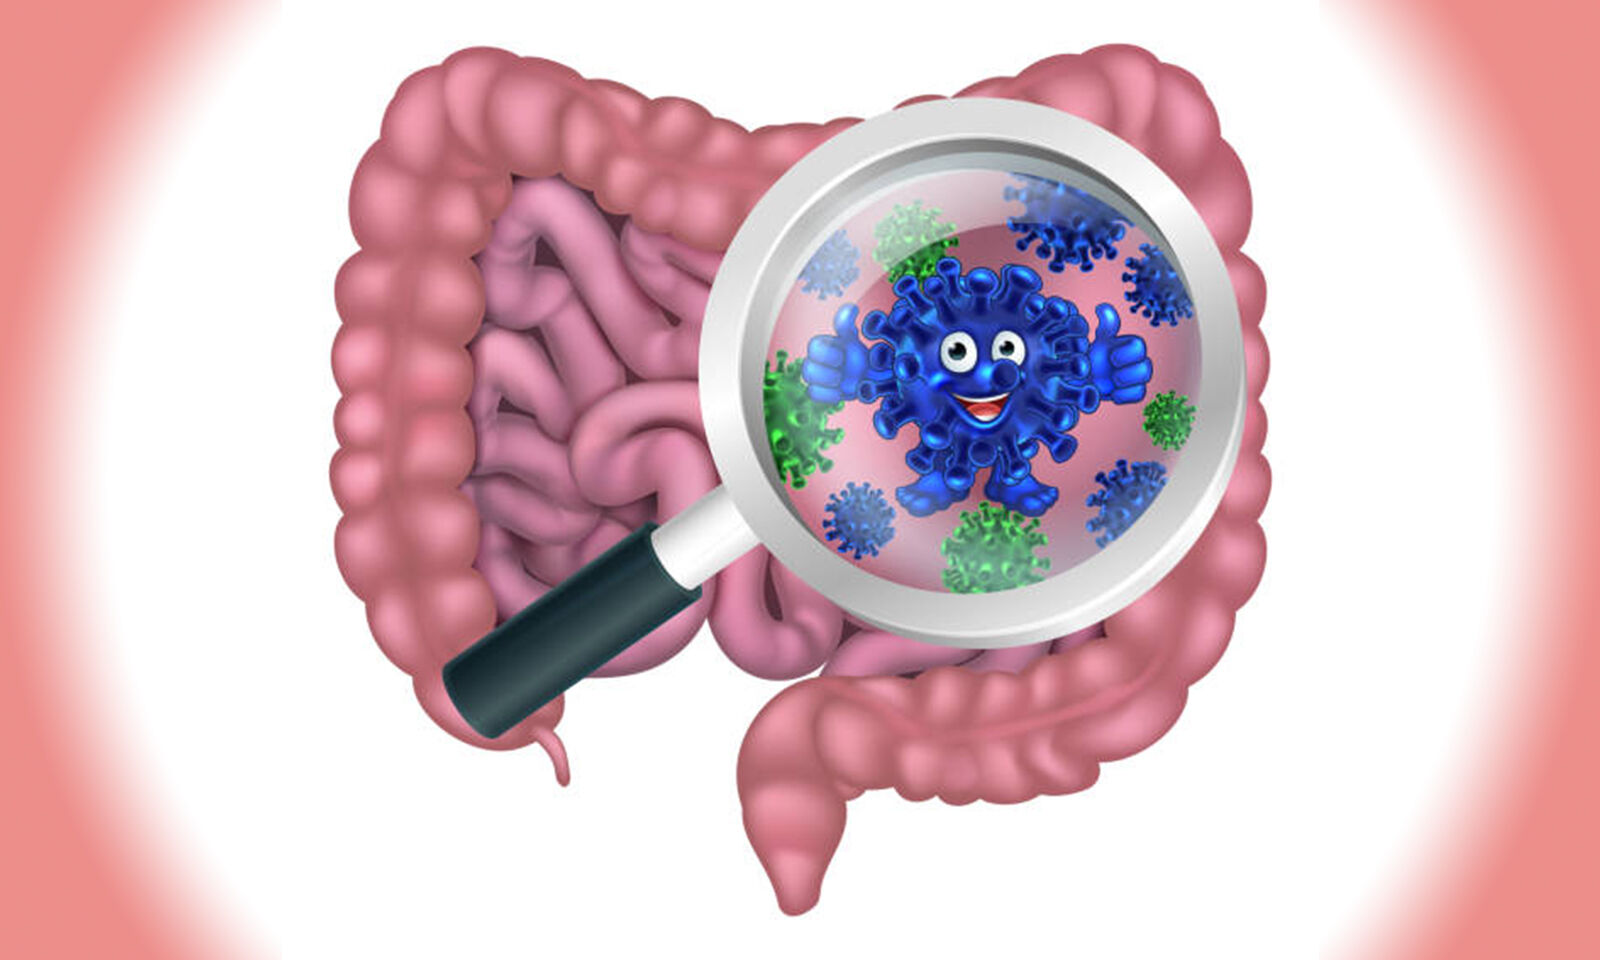 Specific bacterium in the gut linked to irritable bowel syndrome